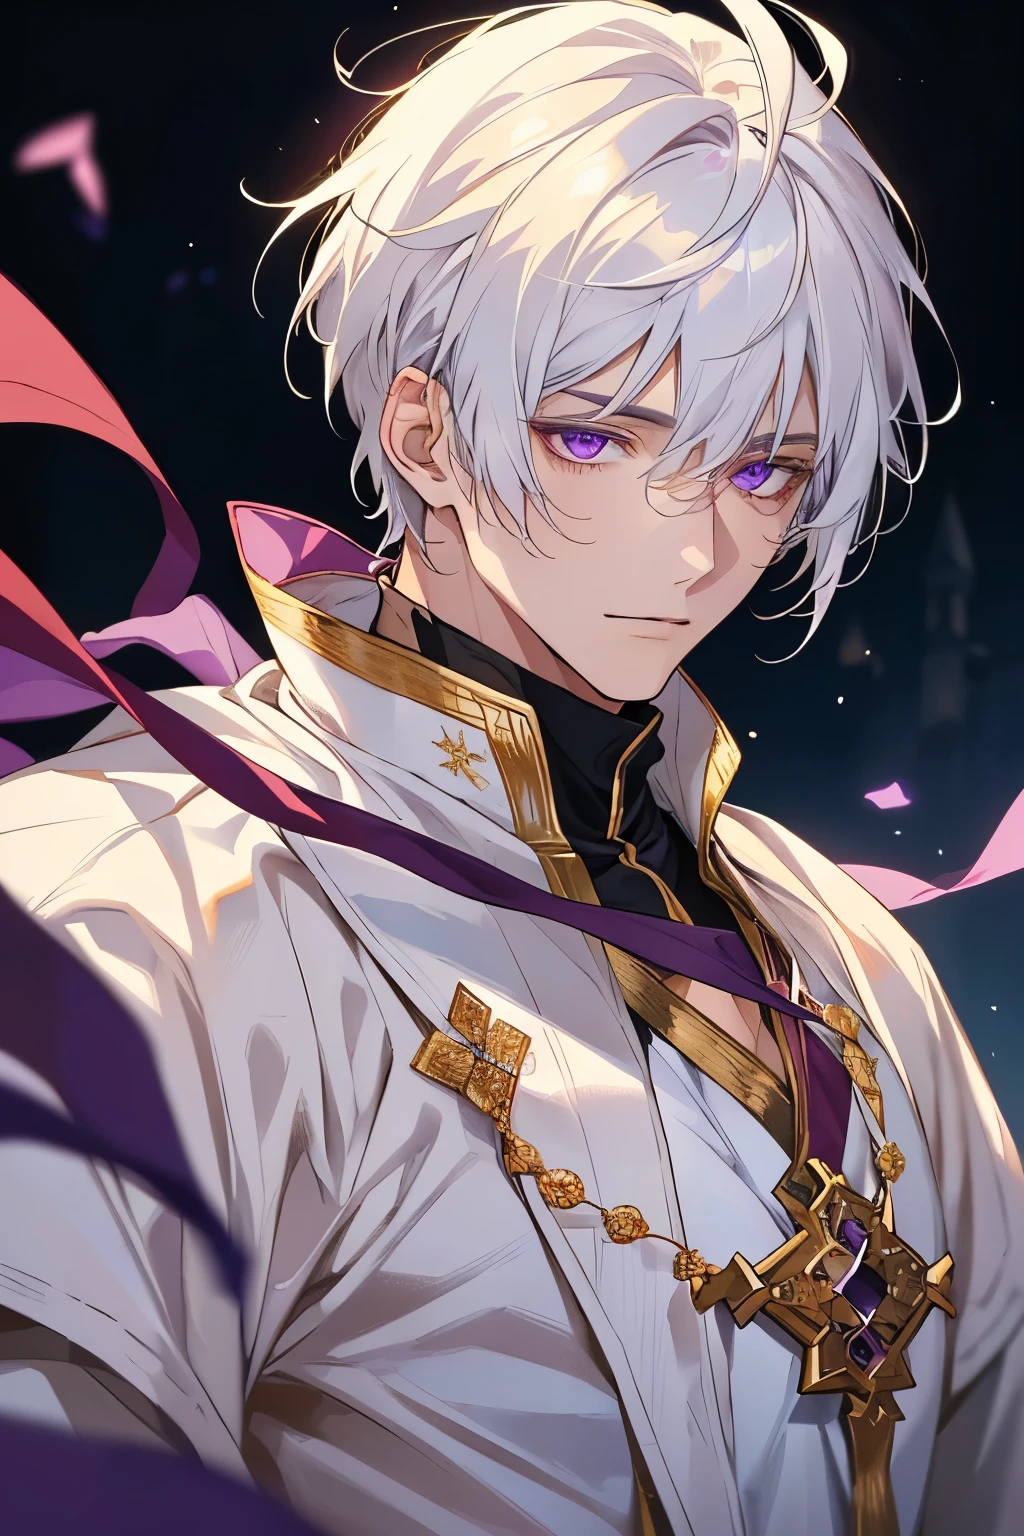 1 man, tranquility, age 35, face, short messy bangs, White hair, amethyst colored eyes, (white clothes, simple clothes), Close-up, medieval times, merchant.